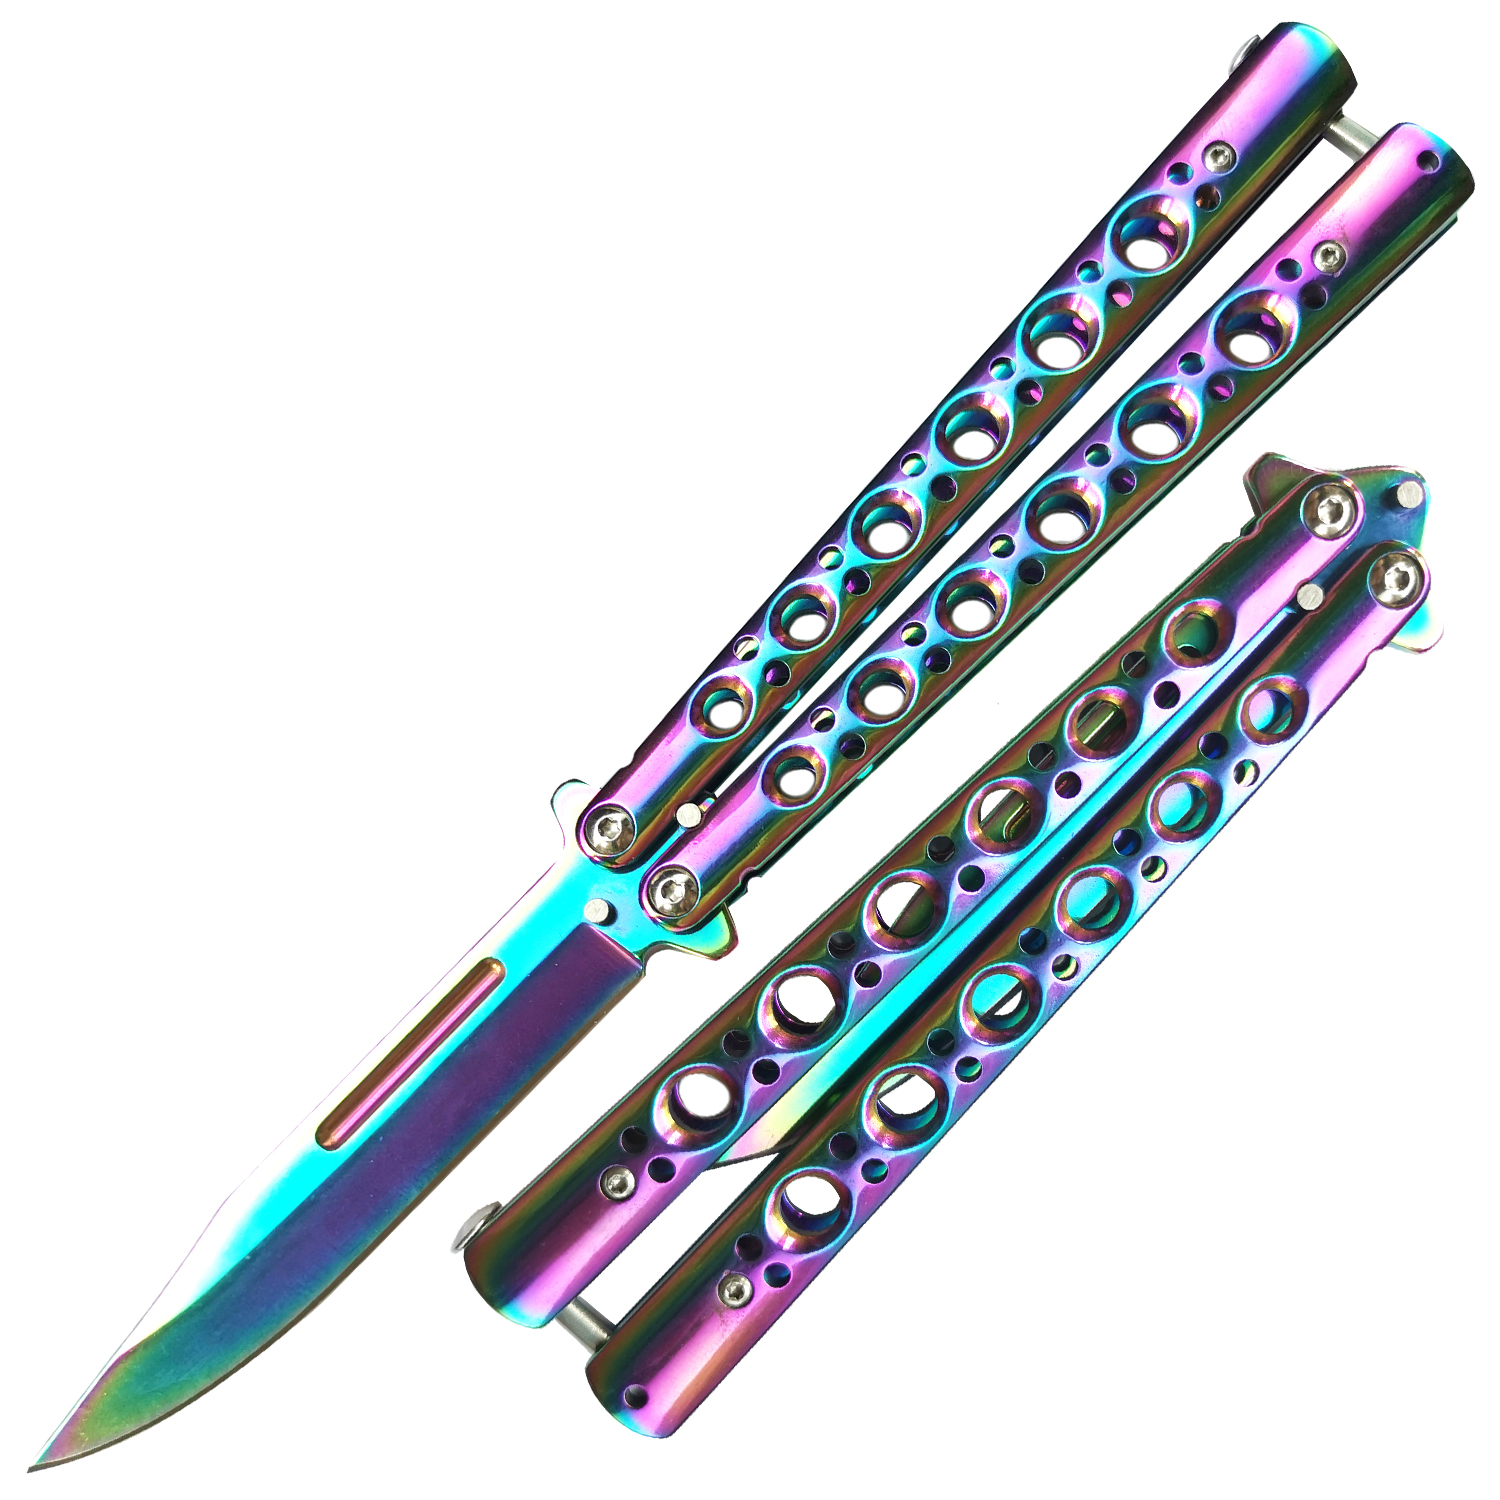 http://www.weapons-universe.com/Rainbow-Titanium-Butterfly-Balisong-Knife.jpg